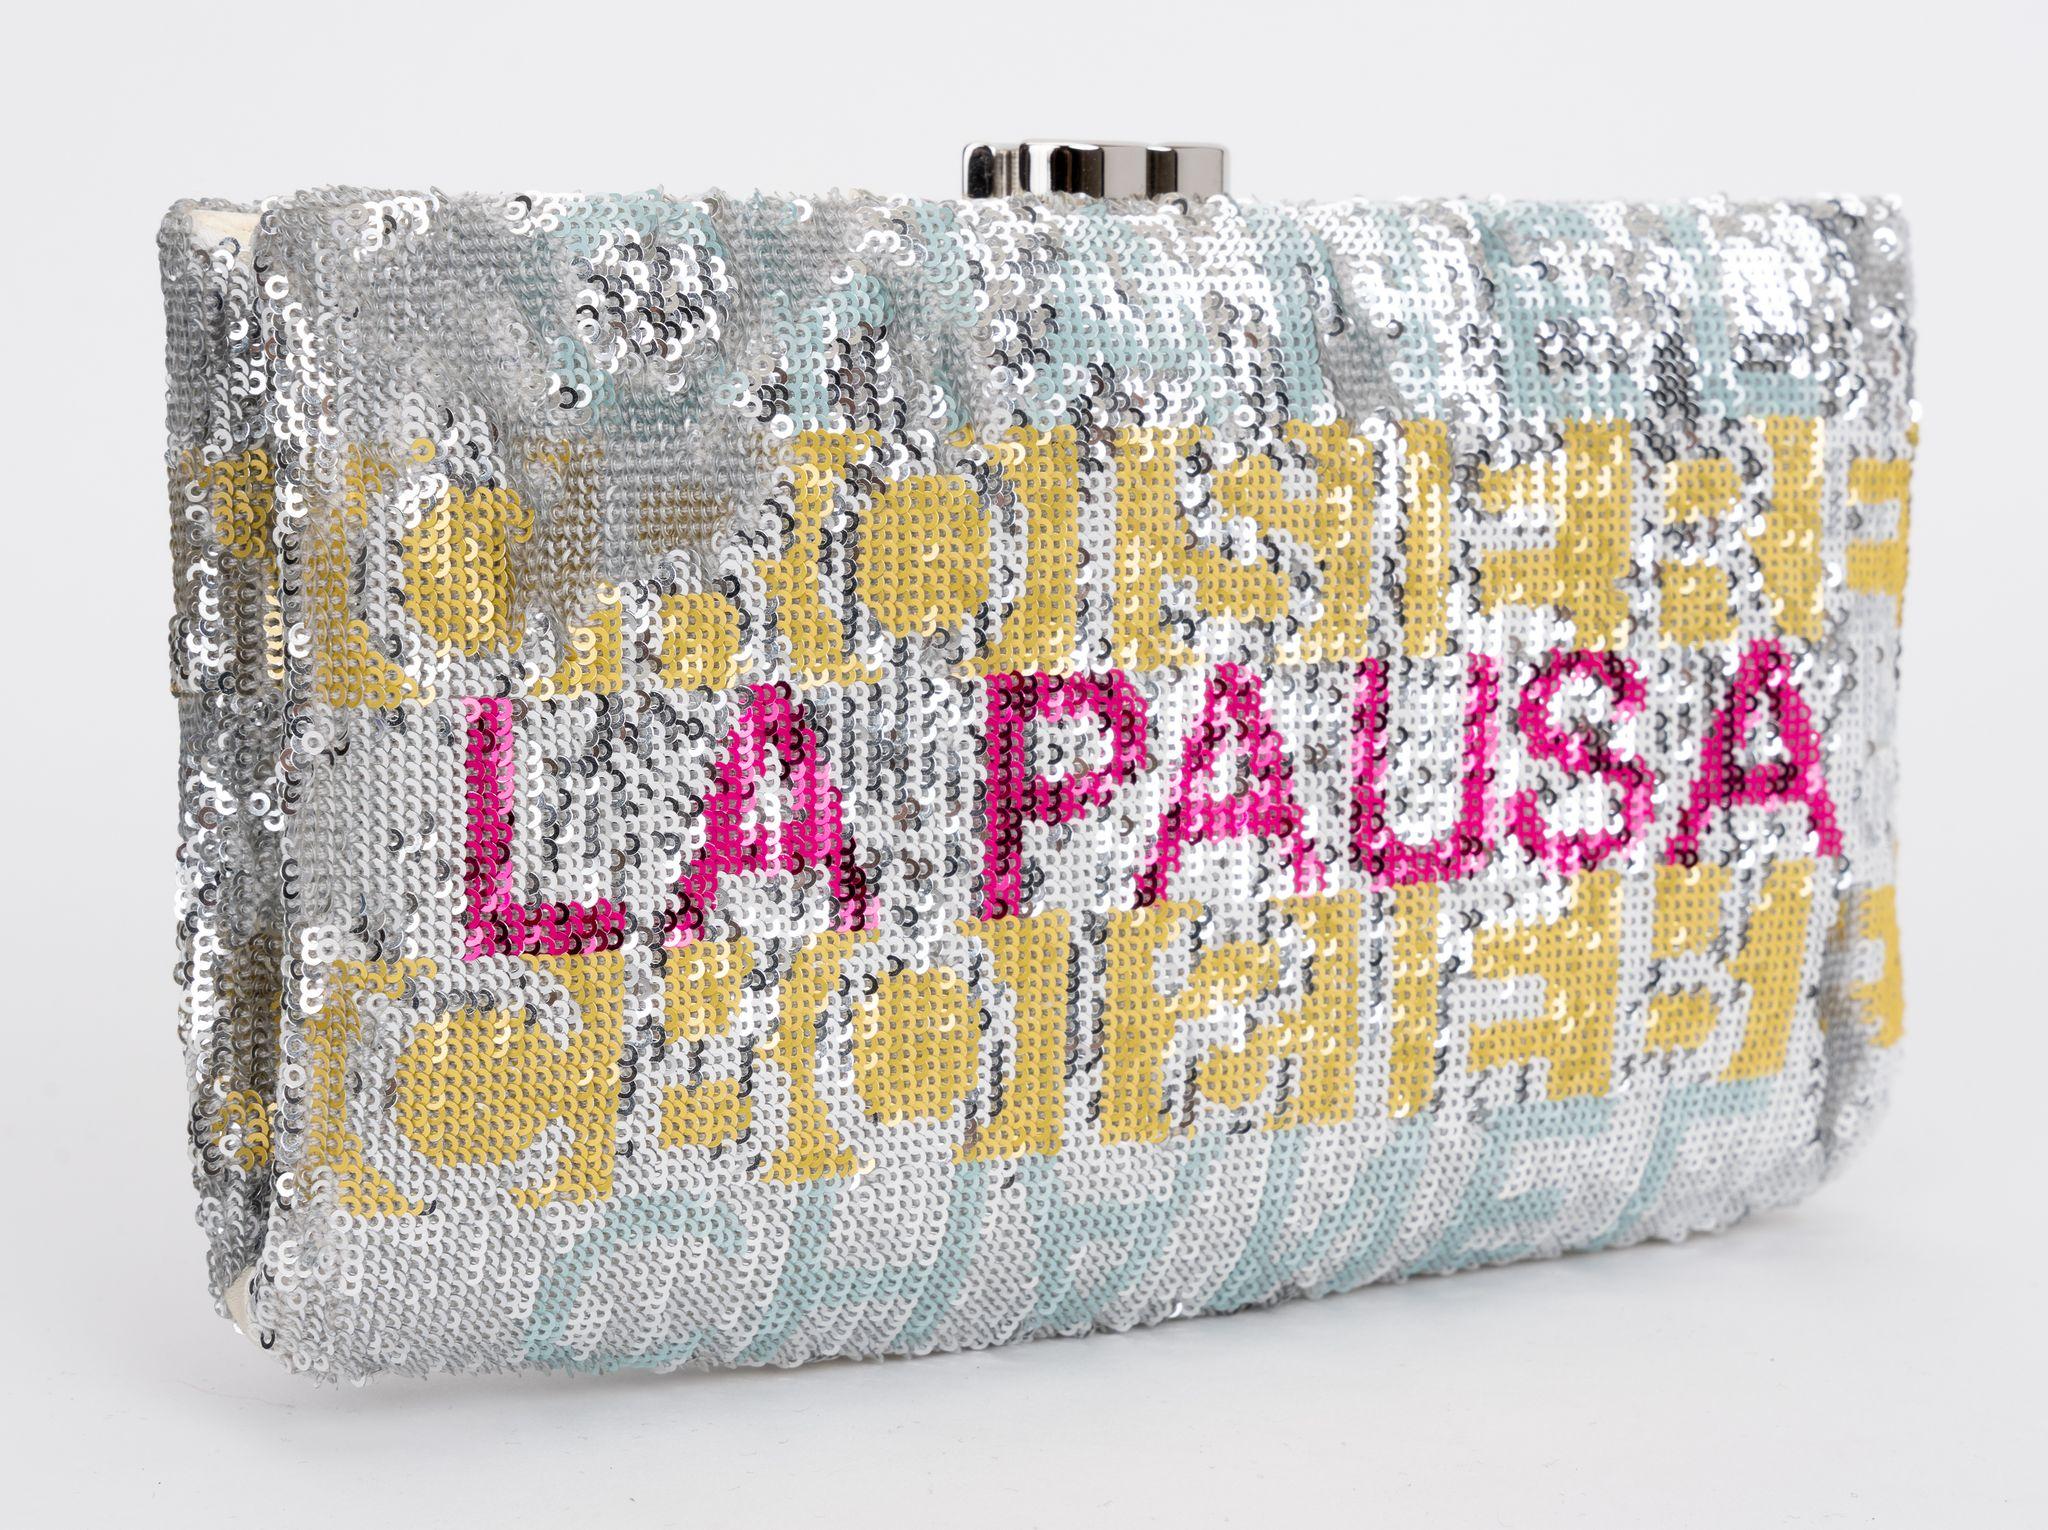 Chanel Sequin Satin Embroidered La Pausa Evening Clutch Silver in Yellow and Pink. The clutch features silver, yellow and pink sequins. The bag opens up to satin lining.
Collection 26. Comes with hologram, id card and original dust cover.